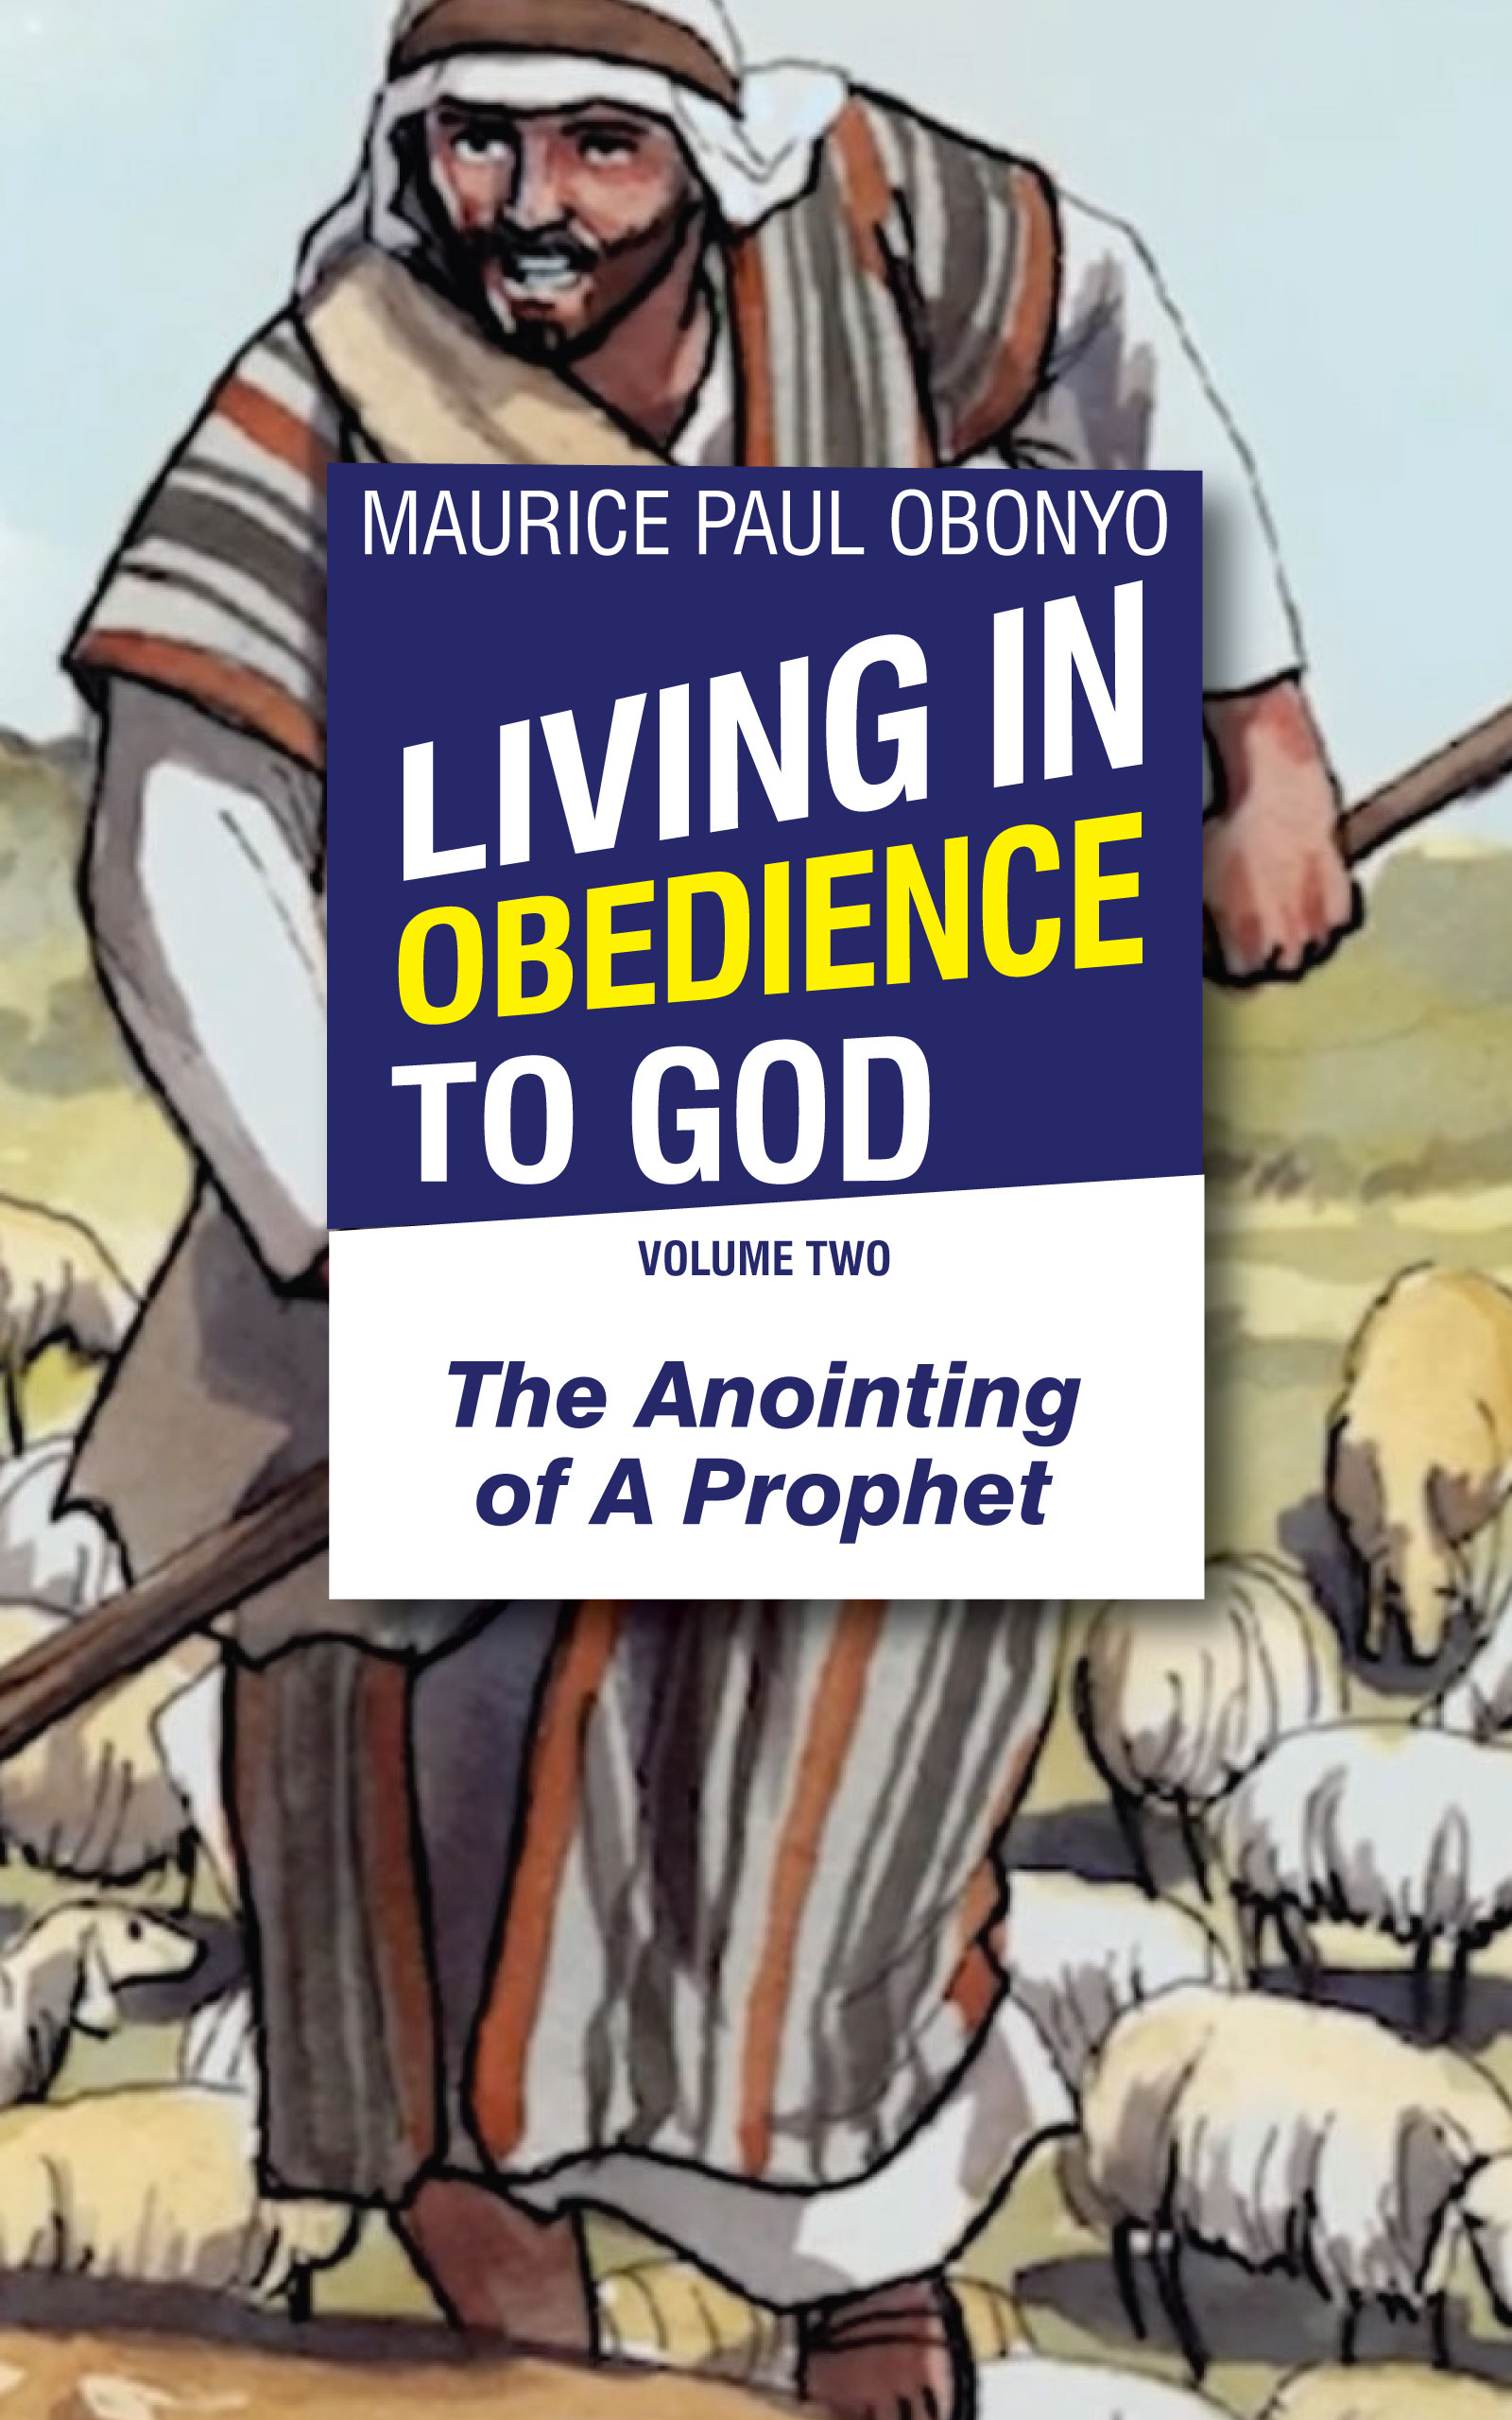 FREE: LIVING IN OBEDIENCE TO GOD: The Anointing of A Prophet by Maurice Paul Obonyo